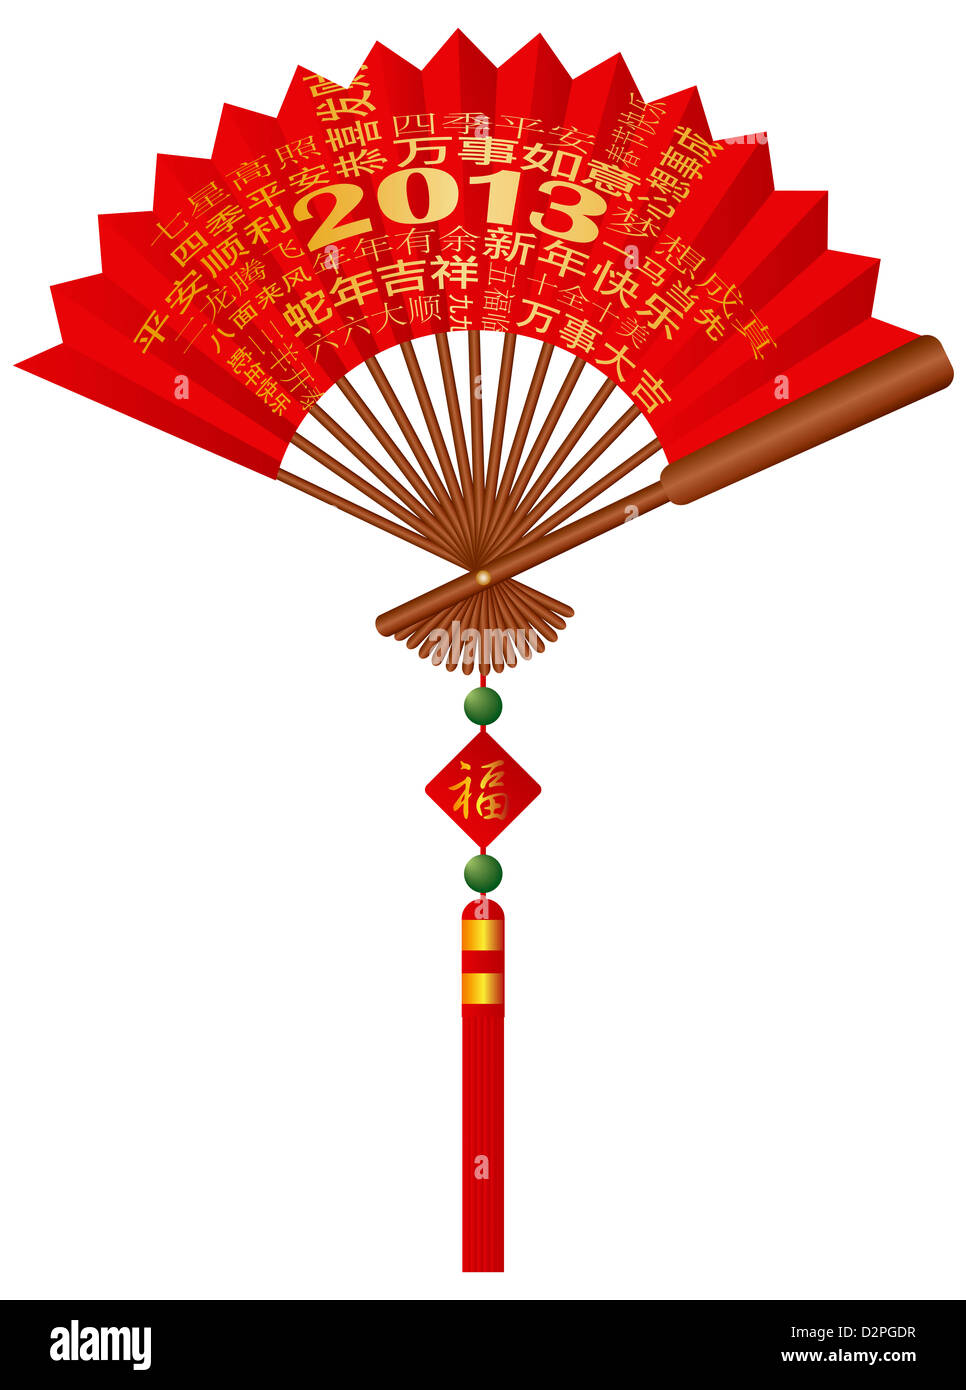 2013 Chinese New Year Calligraphy Well Wishes and Greetings on a Red Festive Fan with Tassel and Jade Bead Stock Photo